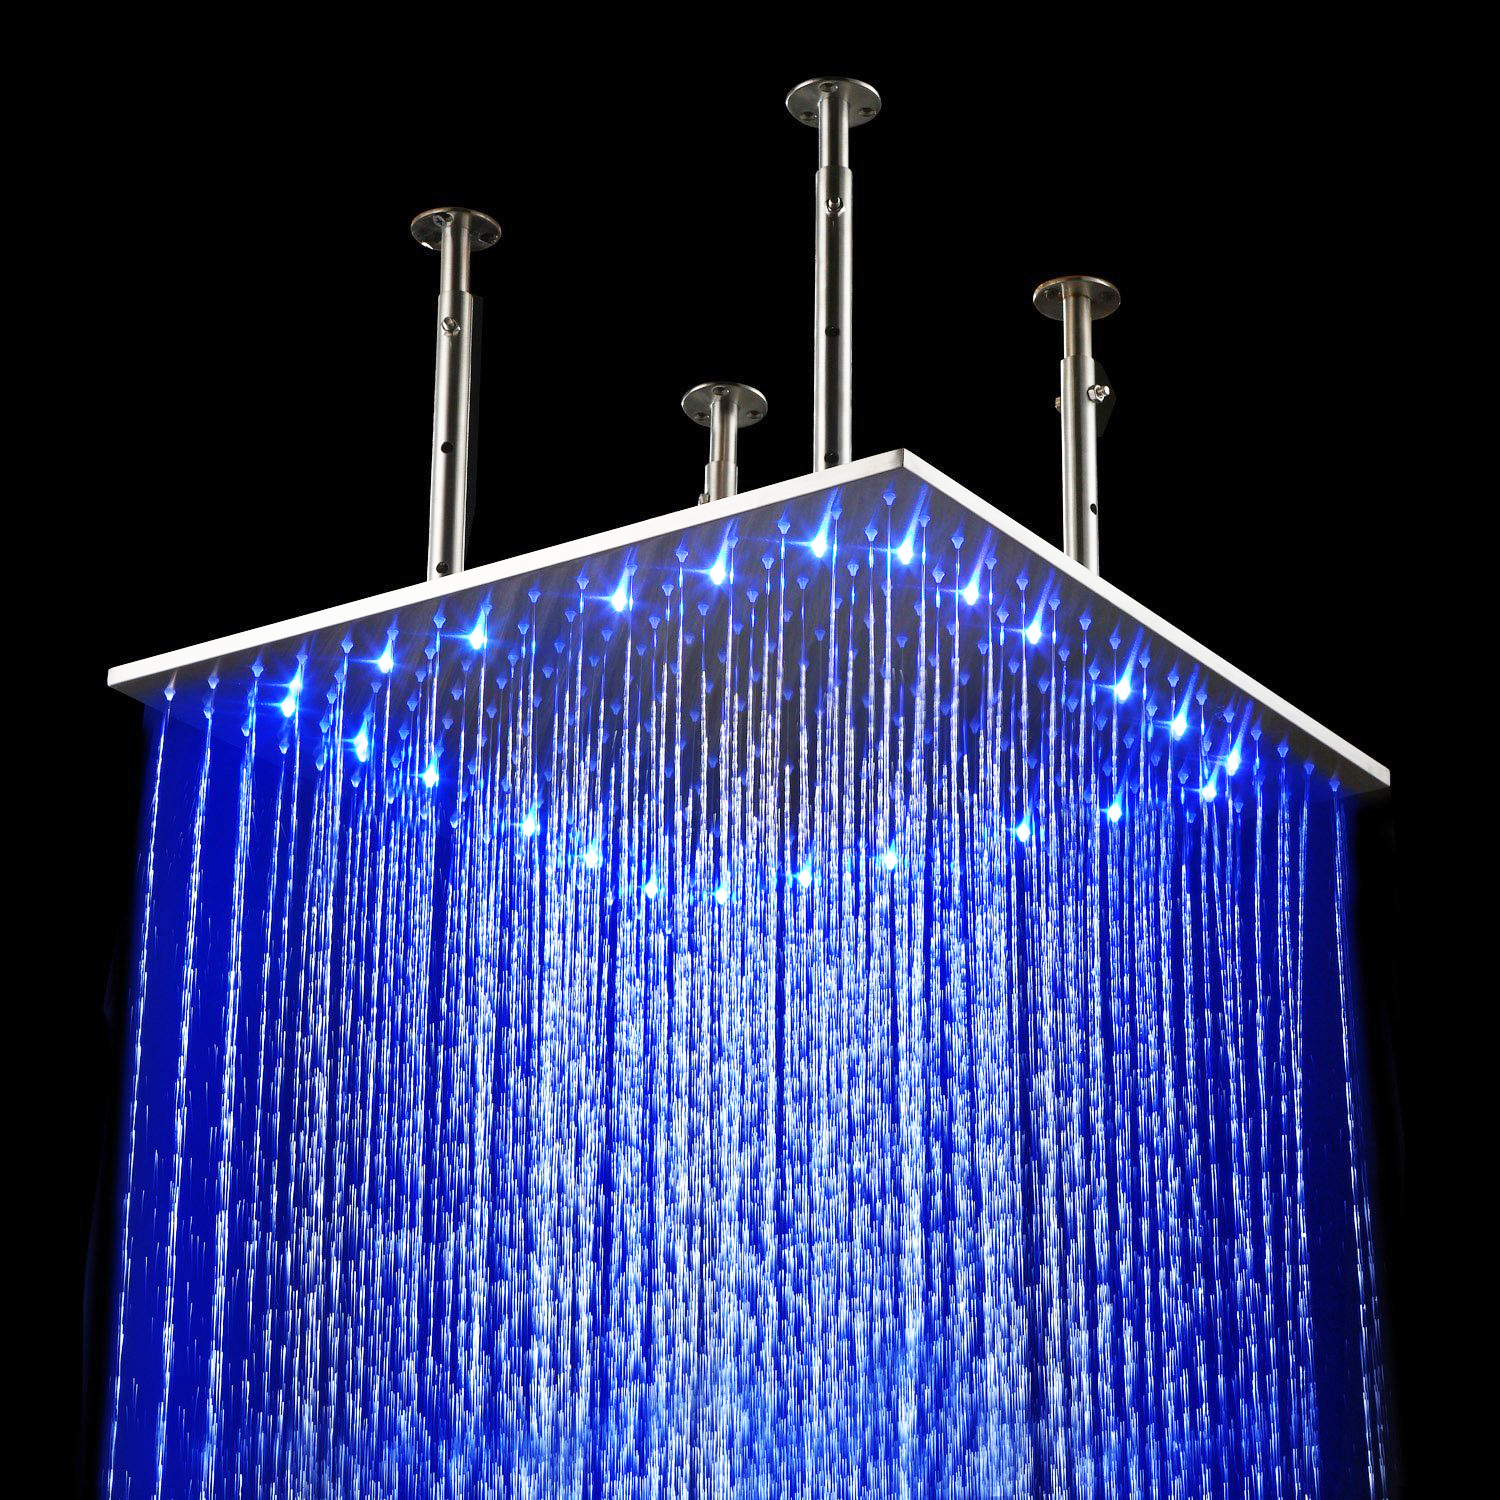 BathSelect 20" Stainless Steel Multi Color Water Powered Led Shower Available in Chrome, Satin Nickel, Copper Metallic and Gold Metallic finish